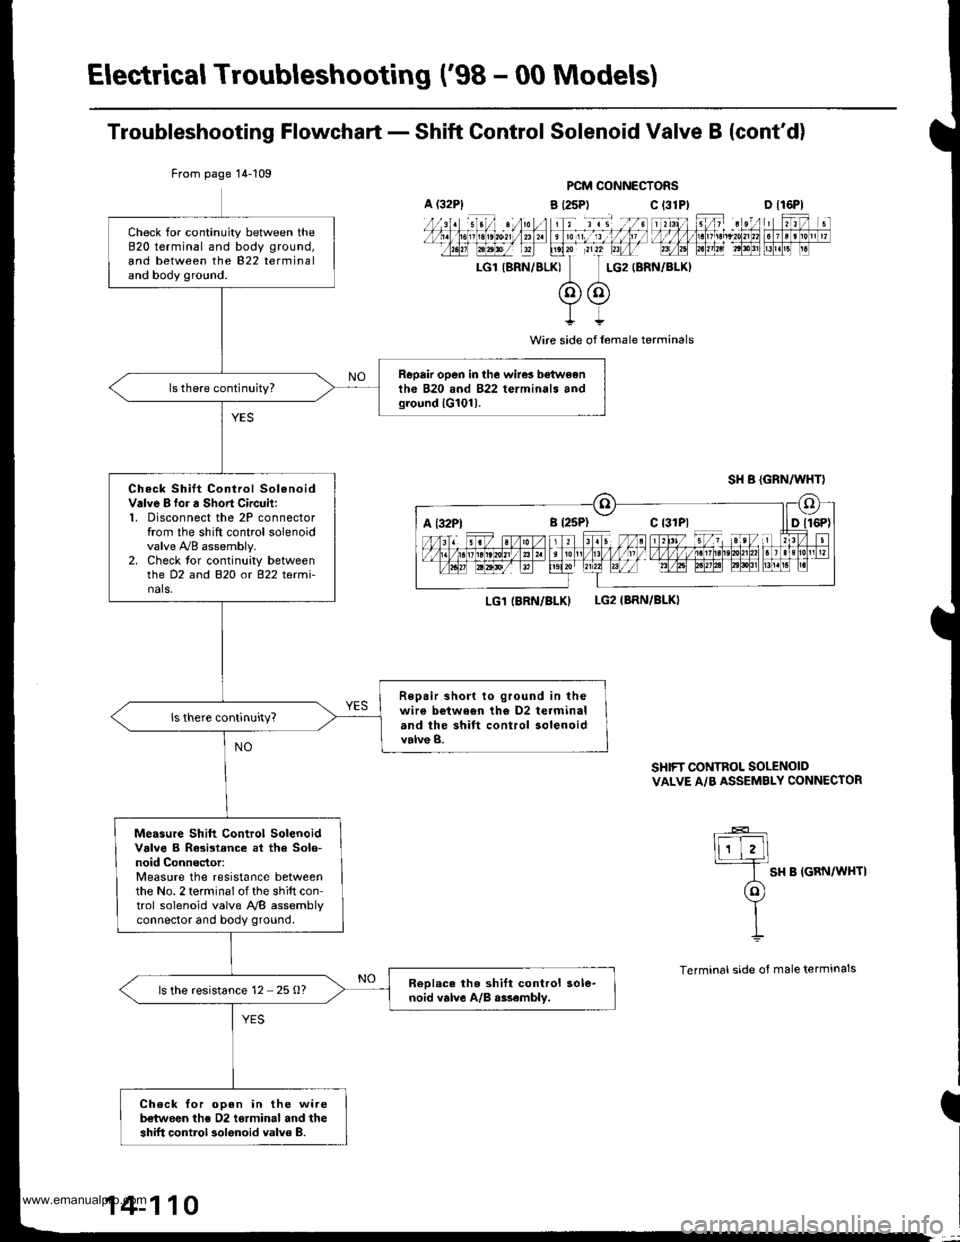 HONDA CR-V 2000 RD1-RD3 / 1.G Manual PDF 
Electrical Troubleshooting (98 - 00 Models)
Troubleshooting Flowchart - Shift Control Solenoid Valve B {contd)
PCM CONNECTORS
a {25P) C t31
I
Wire side of l6male terminals
LG1 IBRN/BLKILG2IBRN/BLKI